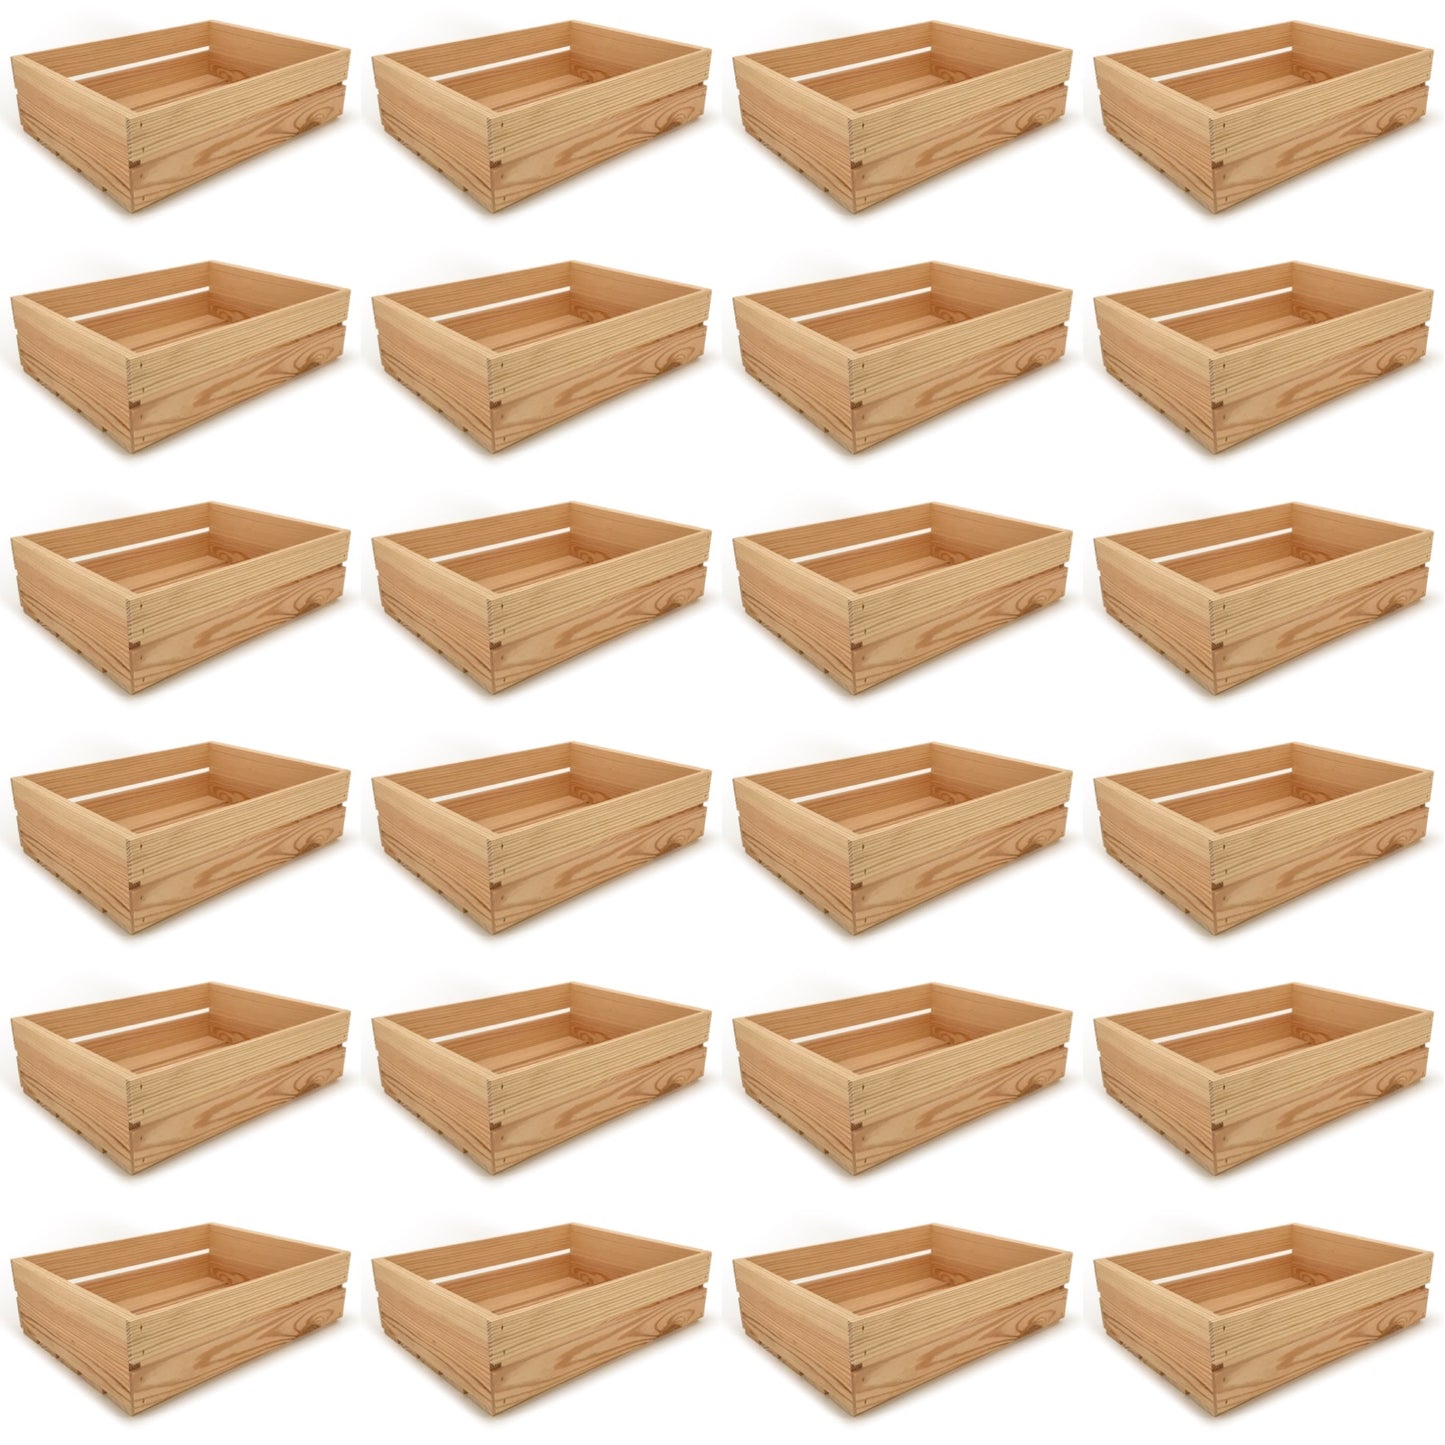 24 Small wooden crates 18x14x5.25, 6-WS-18-14-5.25-NX-NW-NL, 12-WS-18-14-5.25-NX-NW-NL, 24-WS-18-14-5.25-NX-NW-NL, 48-WS-18-14-5.25-NX-NW-NL, 96-WS-18-14-5.25-NX-NW-NL